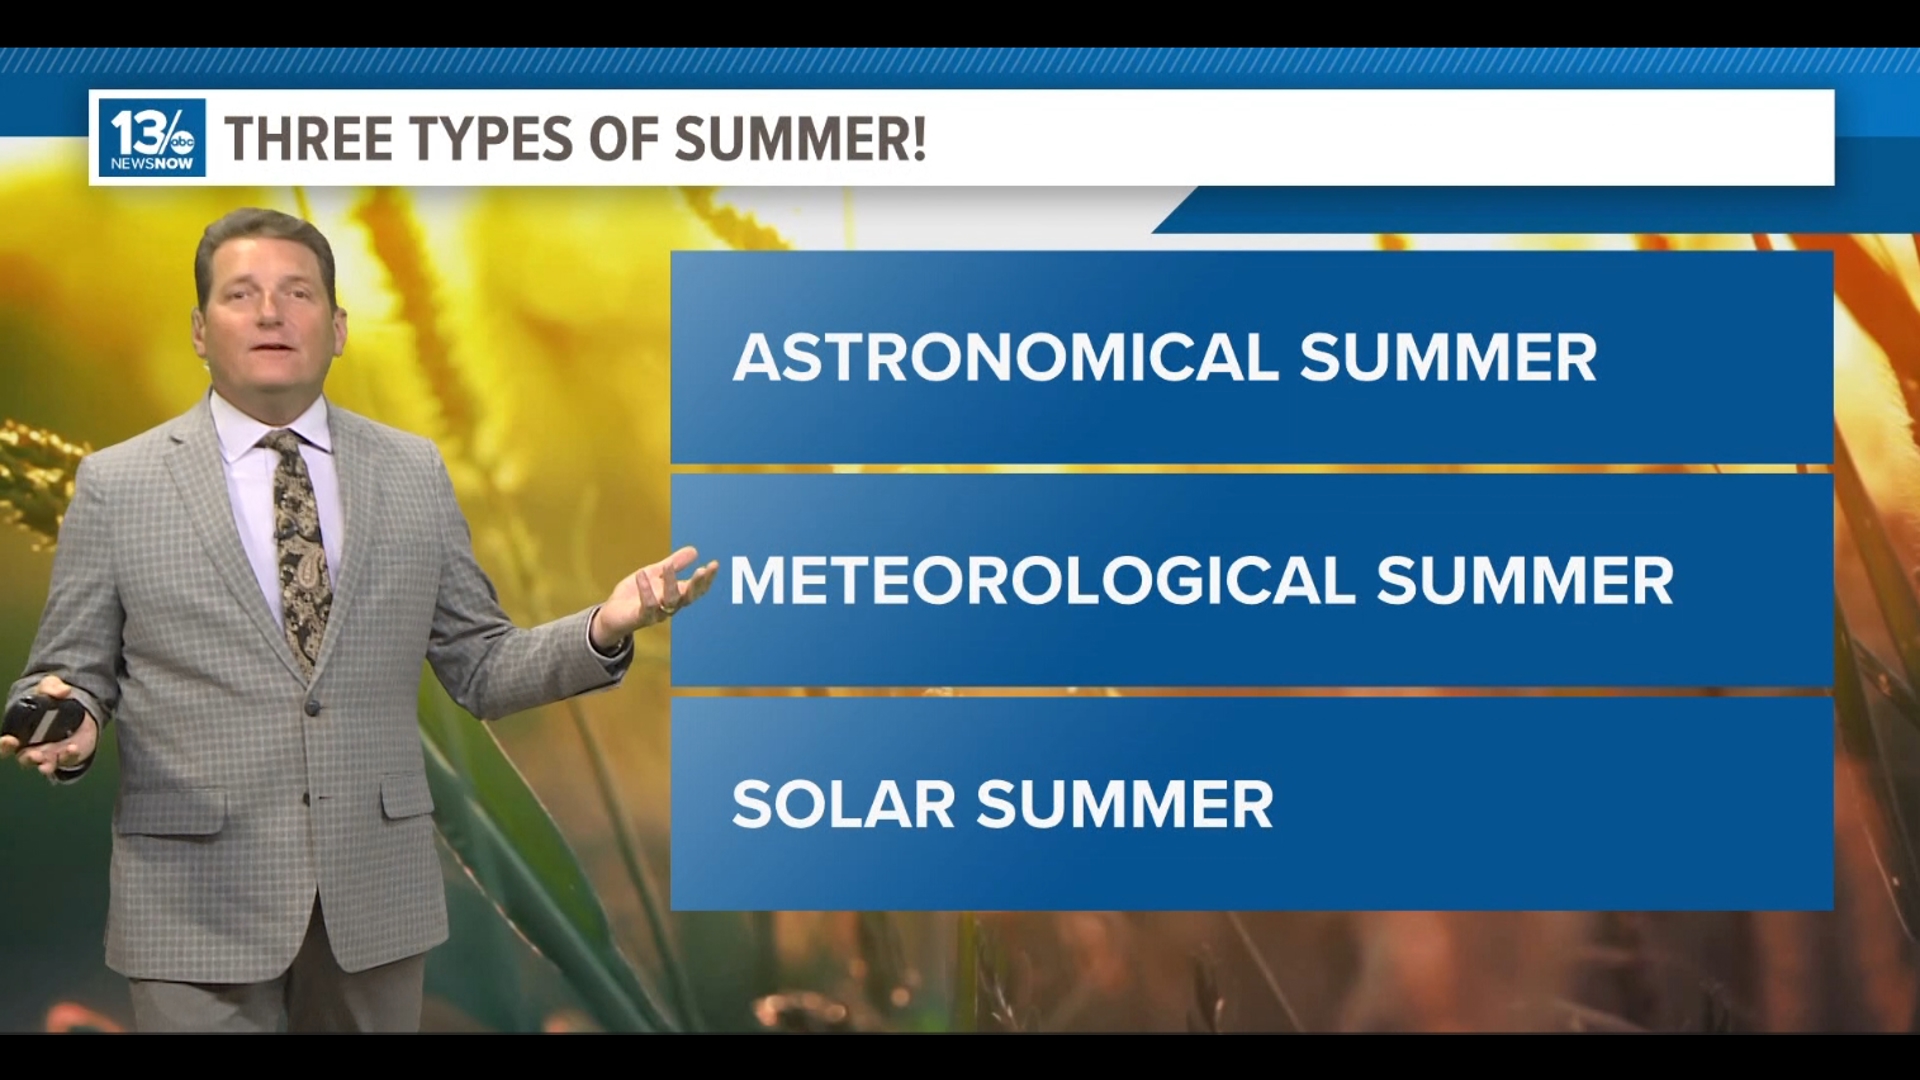 The most typically referenced "summer" is Astronomical Summer. It begins with the Summer Solstice, when the Sun's direct rays reach their northernmost point.